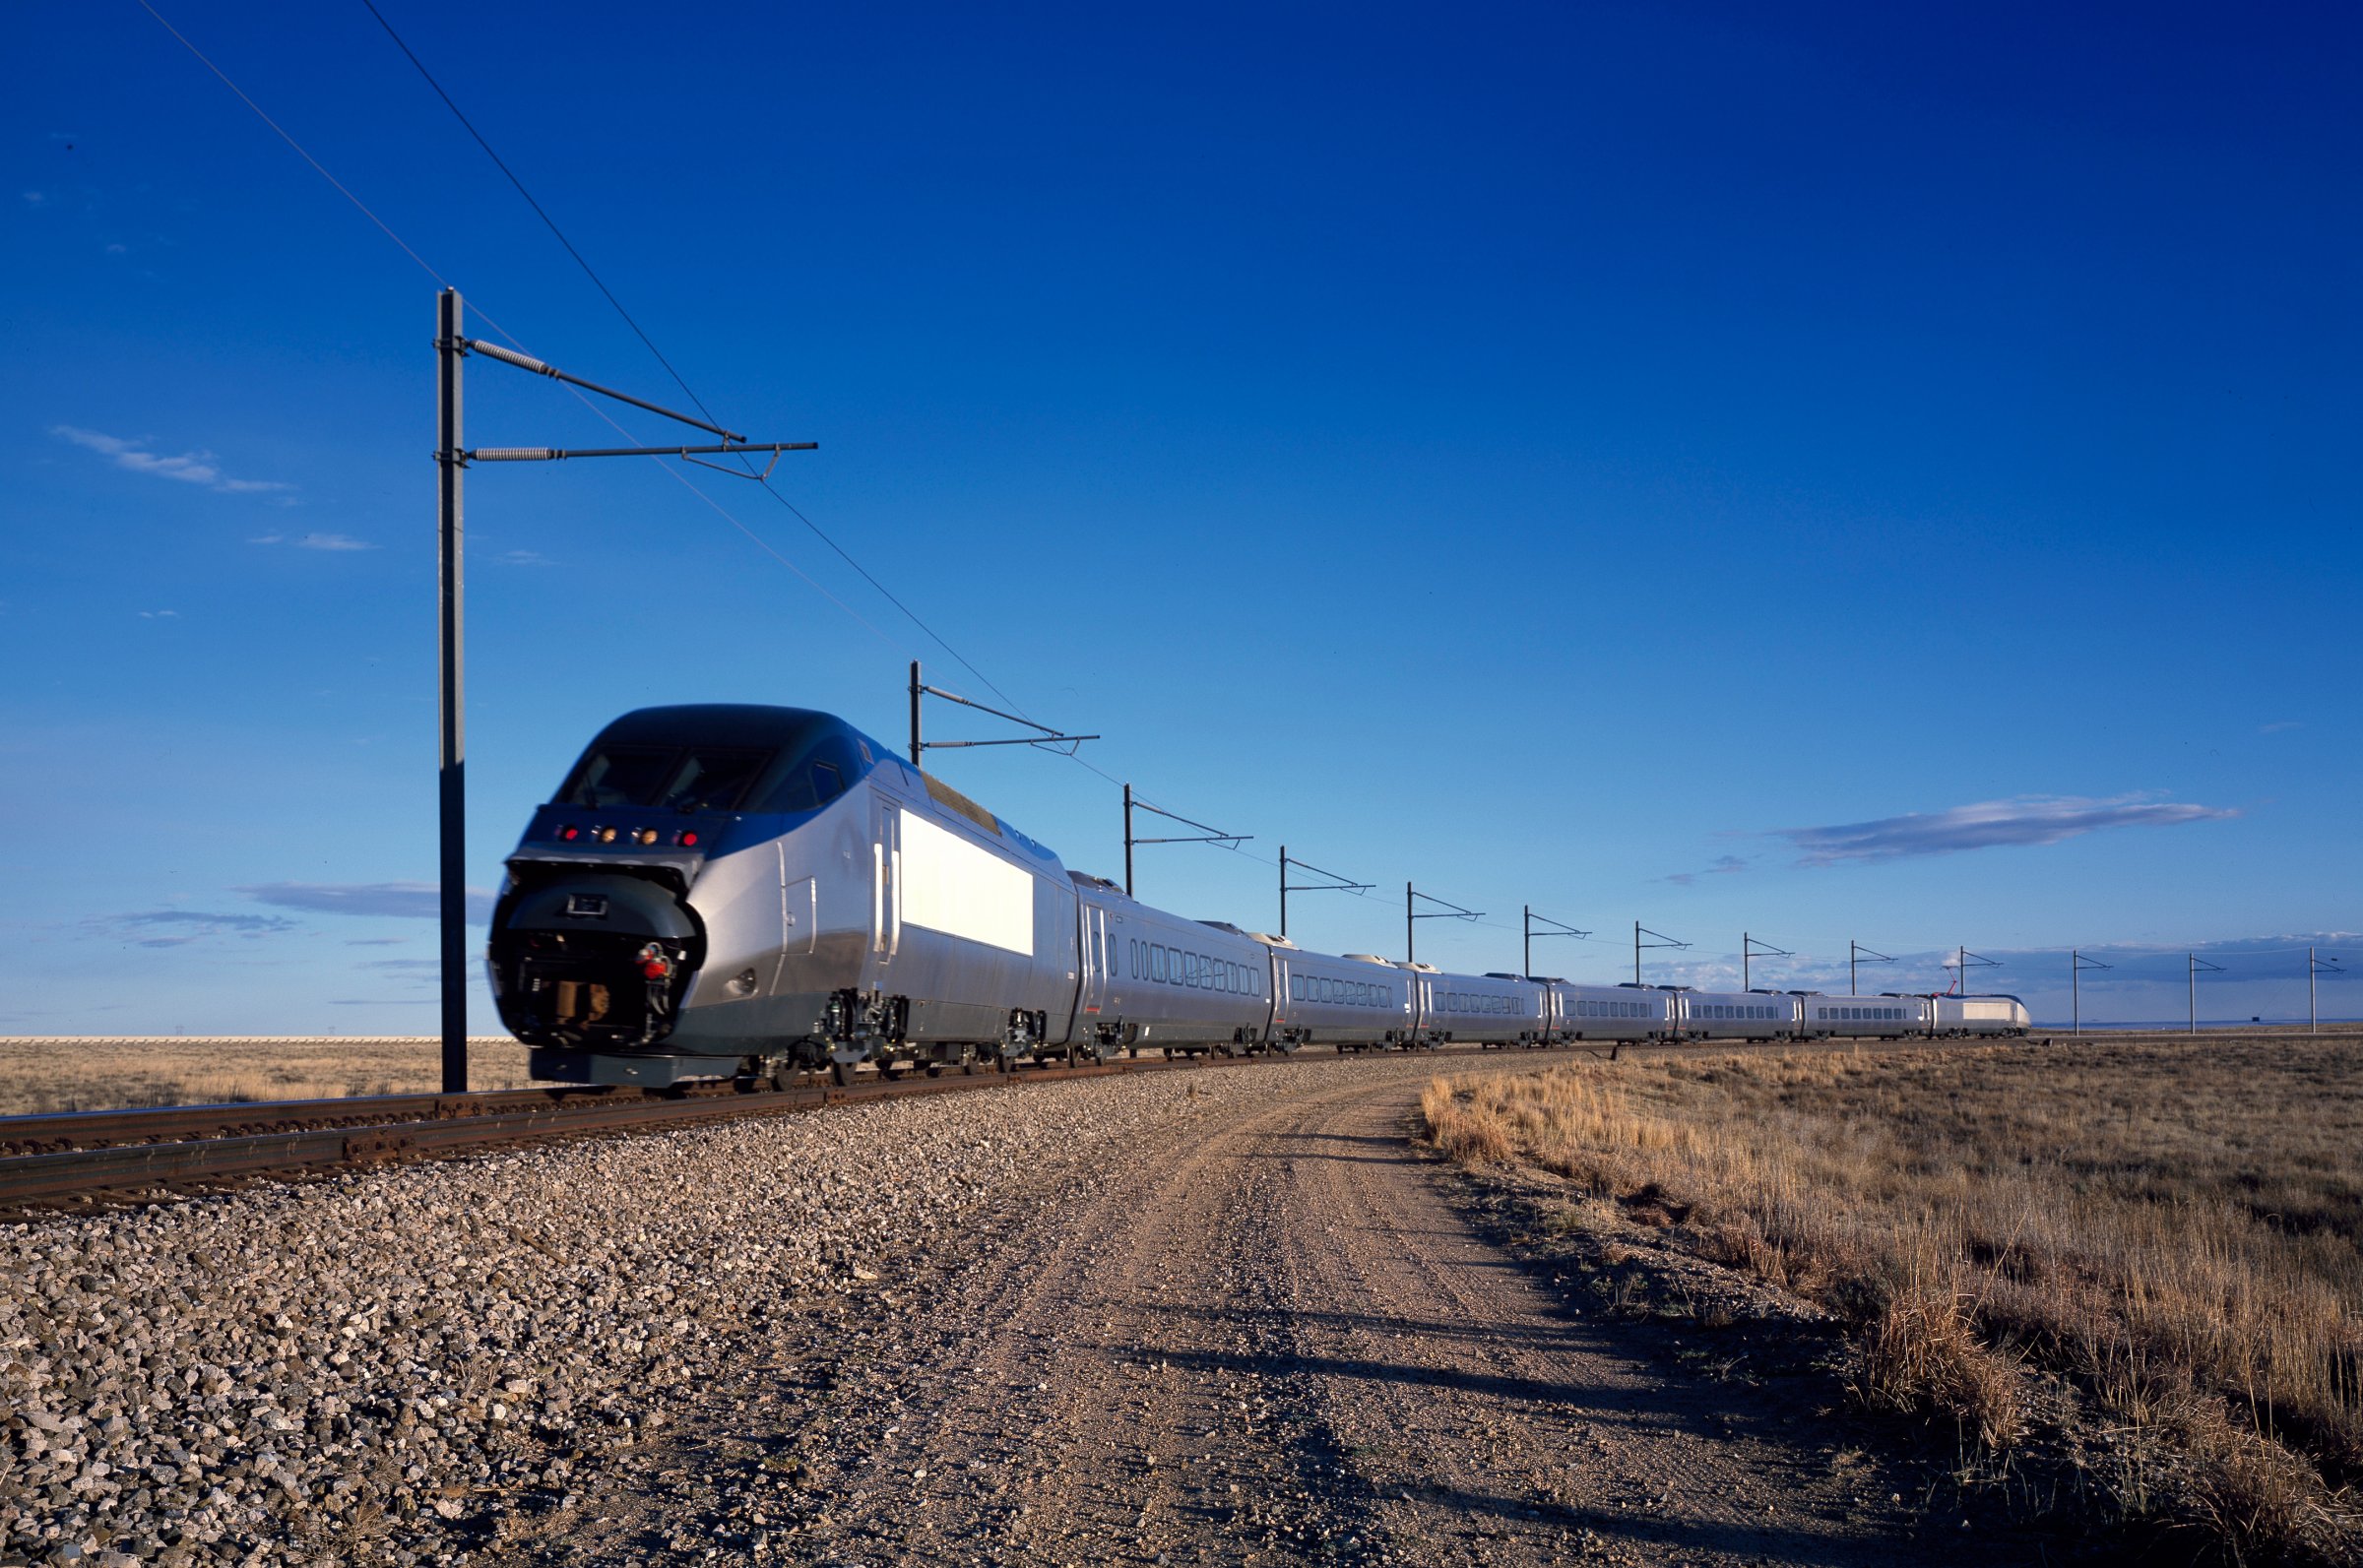 An Amtrak Acela high-speed train is tested in Pueblo, Colo.